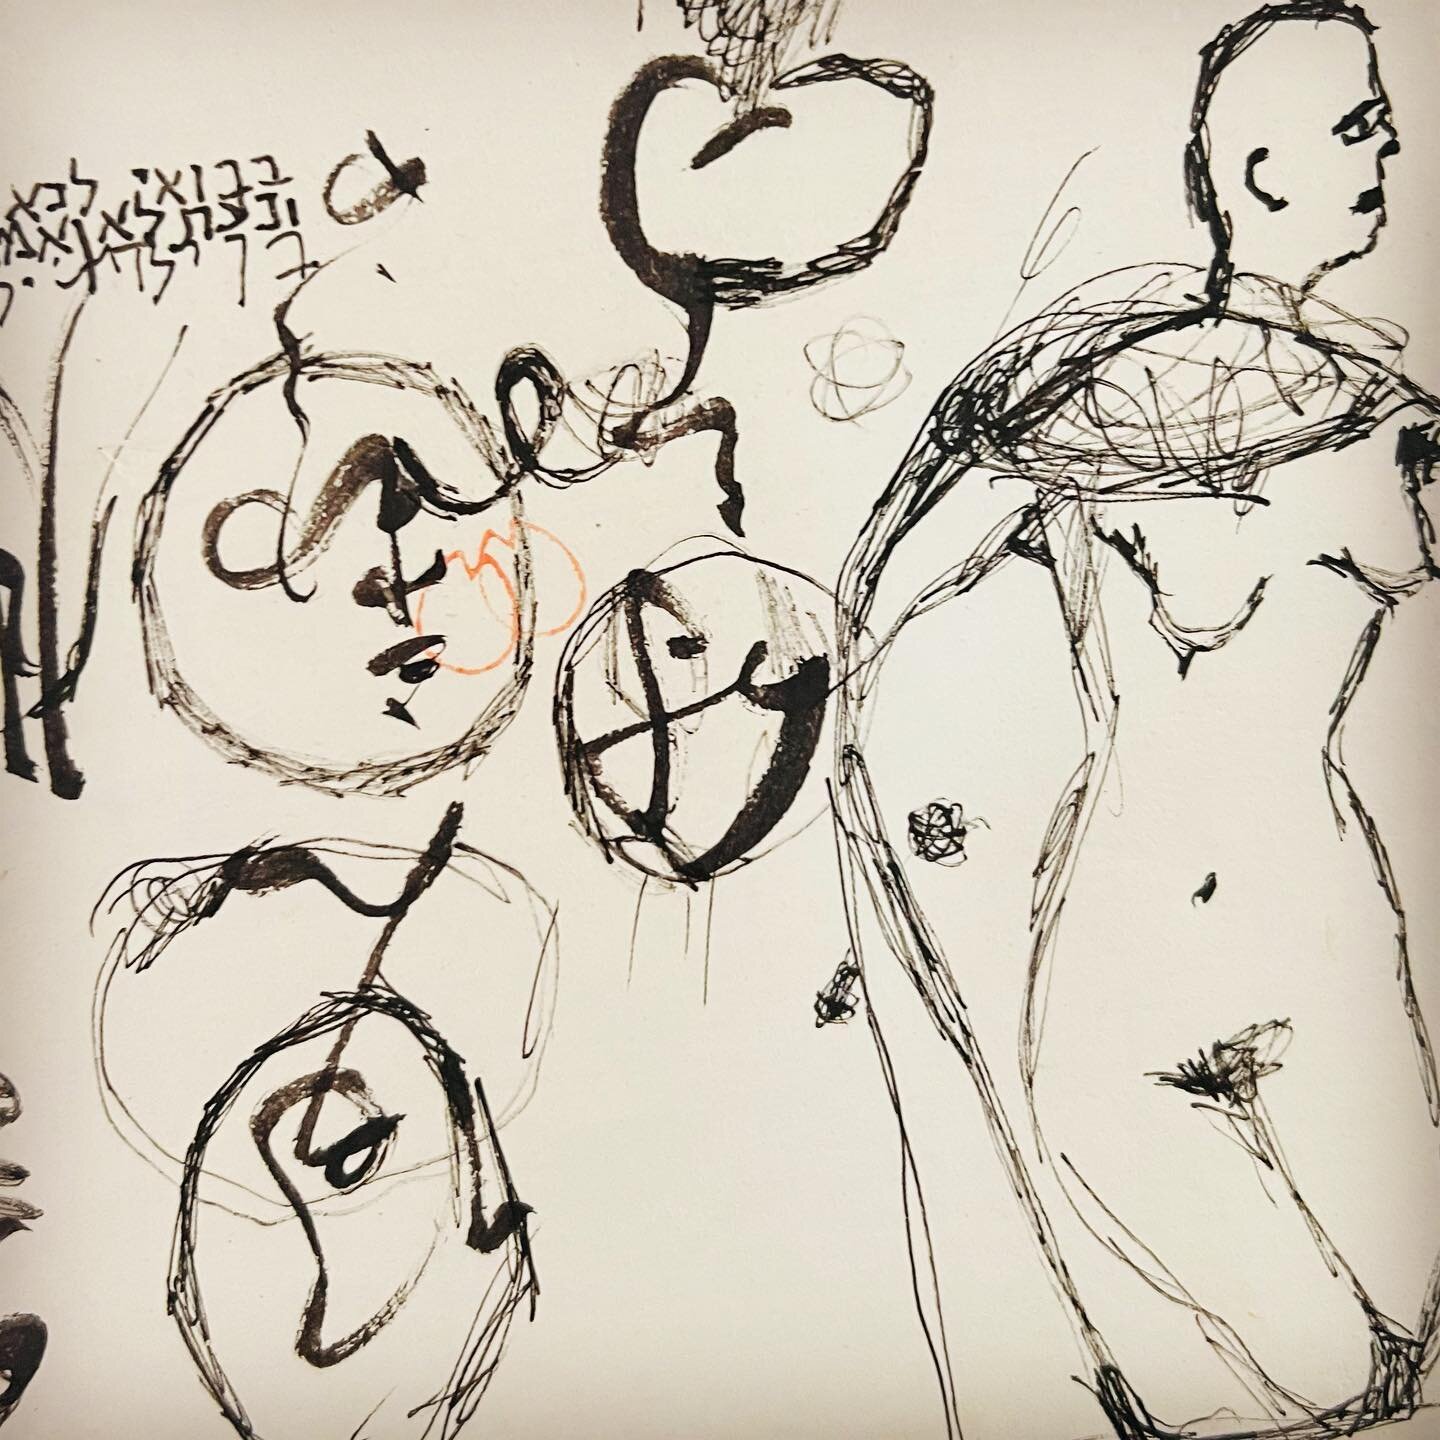 Isolated incidents of light and aimless scribbling while watching disheartening pieces of news (olds). 
And so it goes these days.

#nowords #grief #undertherubble #dontnumbit #nohunger #biglove #wellofgrief #behuman #lifeissacred #neveragainforall #